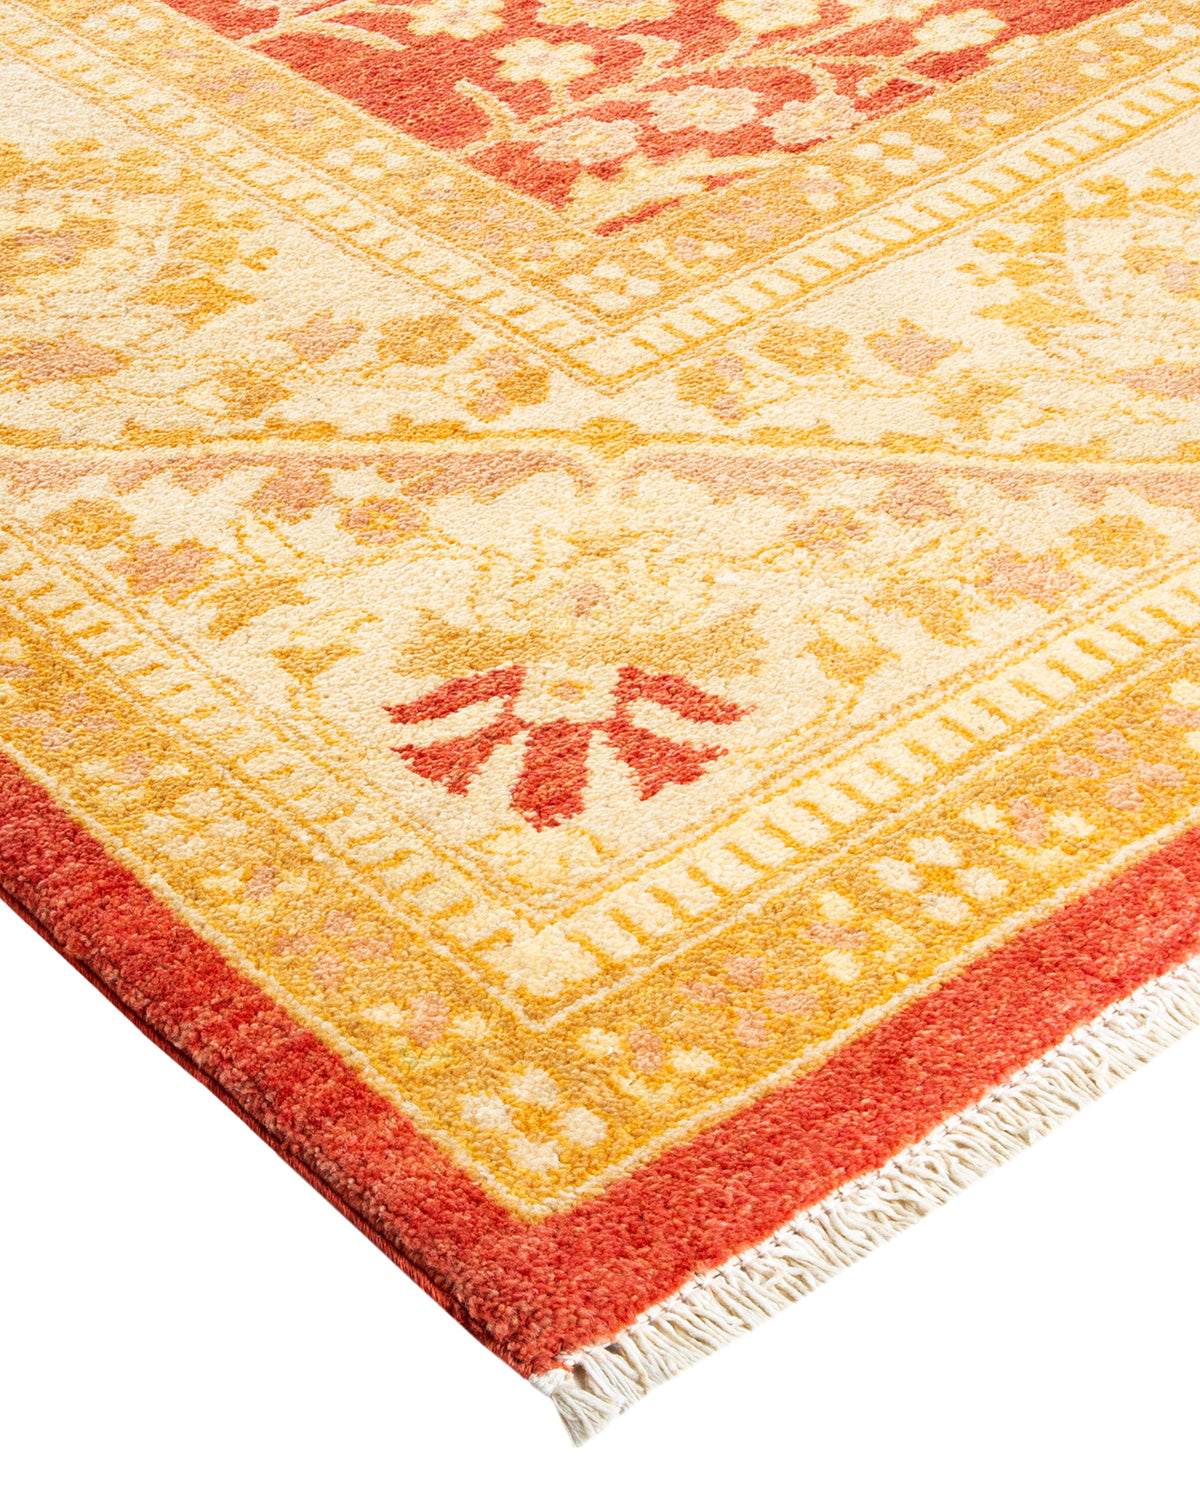 Eclectic, One-of-a-Kind Hand-Knotted Area Rug  - Orange, 8' 10" x 12' 3"